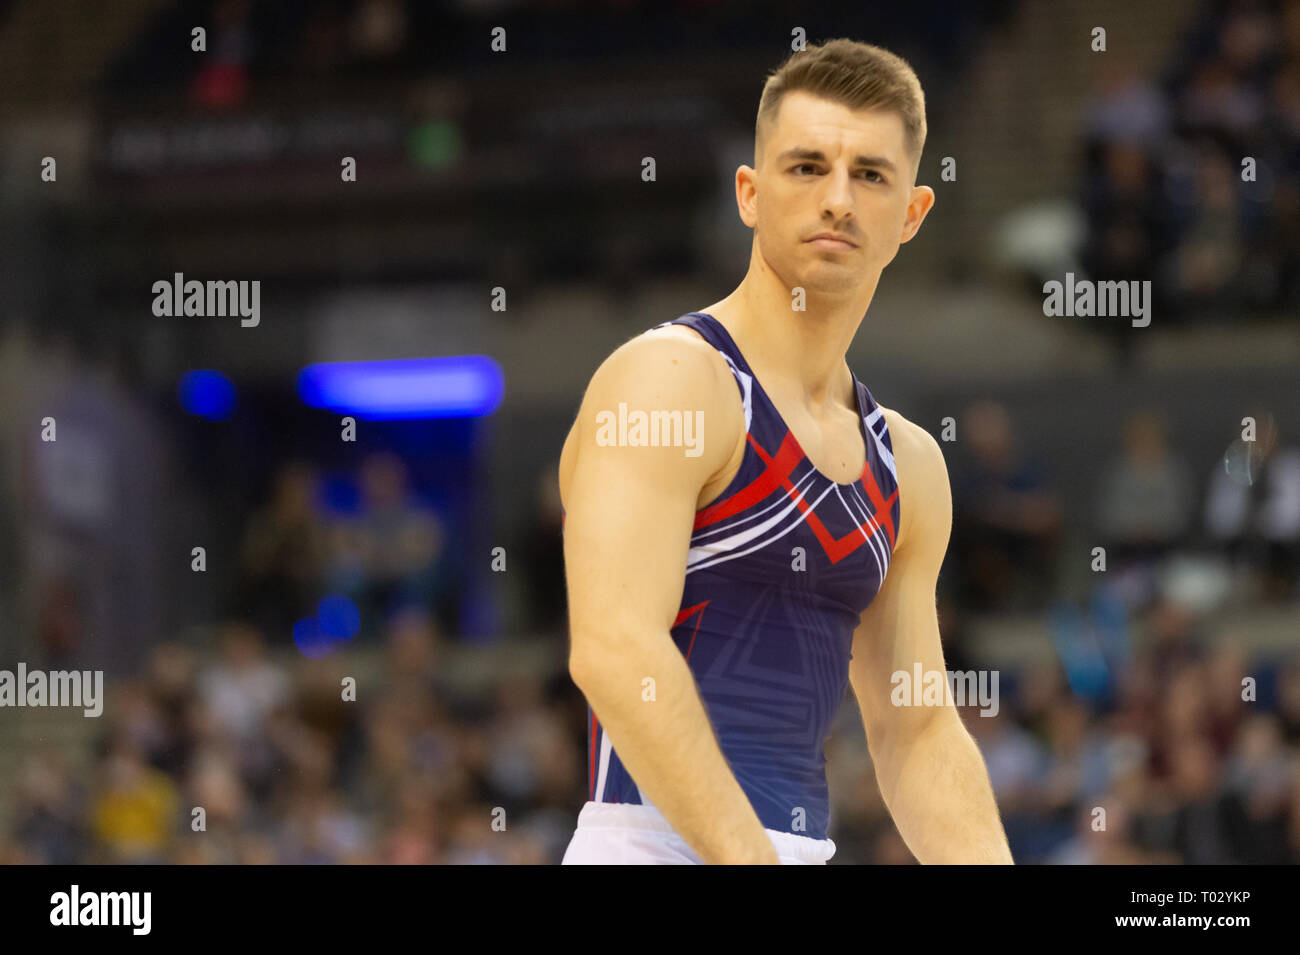 Liverpool, UK. 16th March 2019. Max Whitlock, MBE of South Essex Gymnastics competing at the Men’s and Women’s Artistic British Championships 2019, M&S Bank Arena, Liverpool, UK. Credit: Iain Scott Photography/Alamy Live News Stock Photo